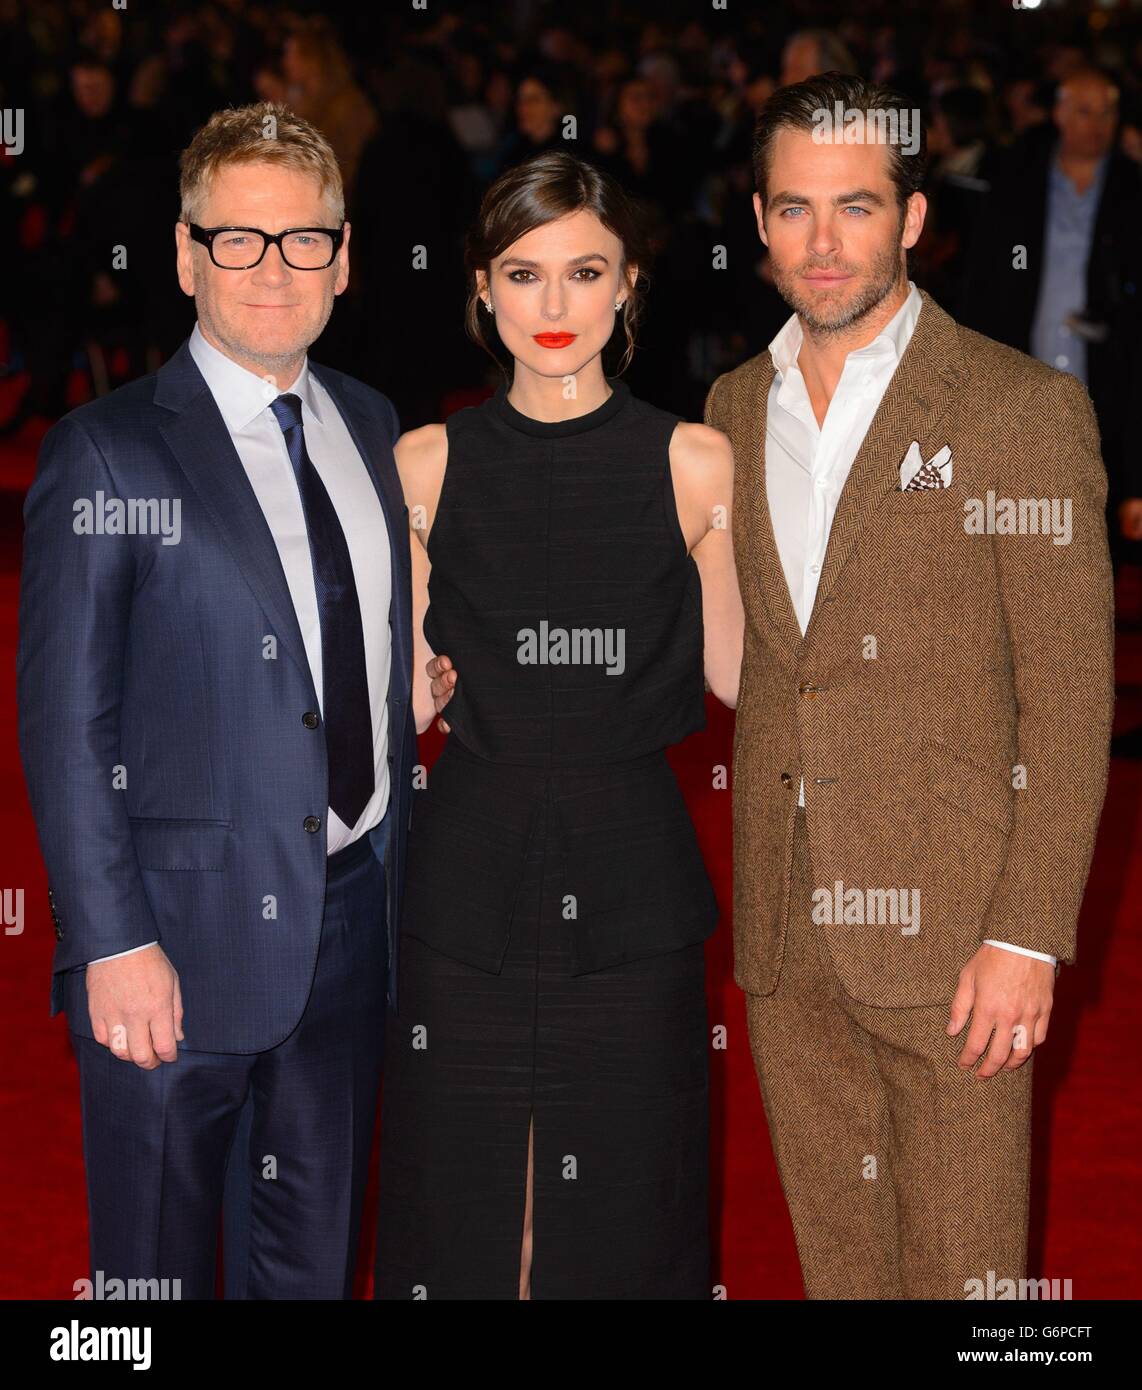 Director Kenneth Branagh, Keira Knightley and Chris Pine arrive at the European film premiere for Jack Ryan at the Vue cinema, Leicester Square, London. Stock Photo